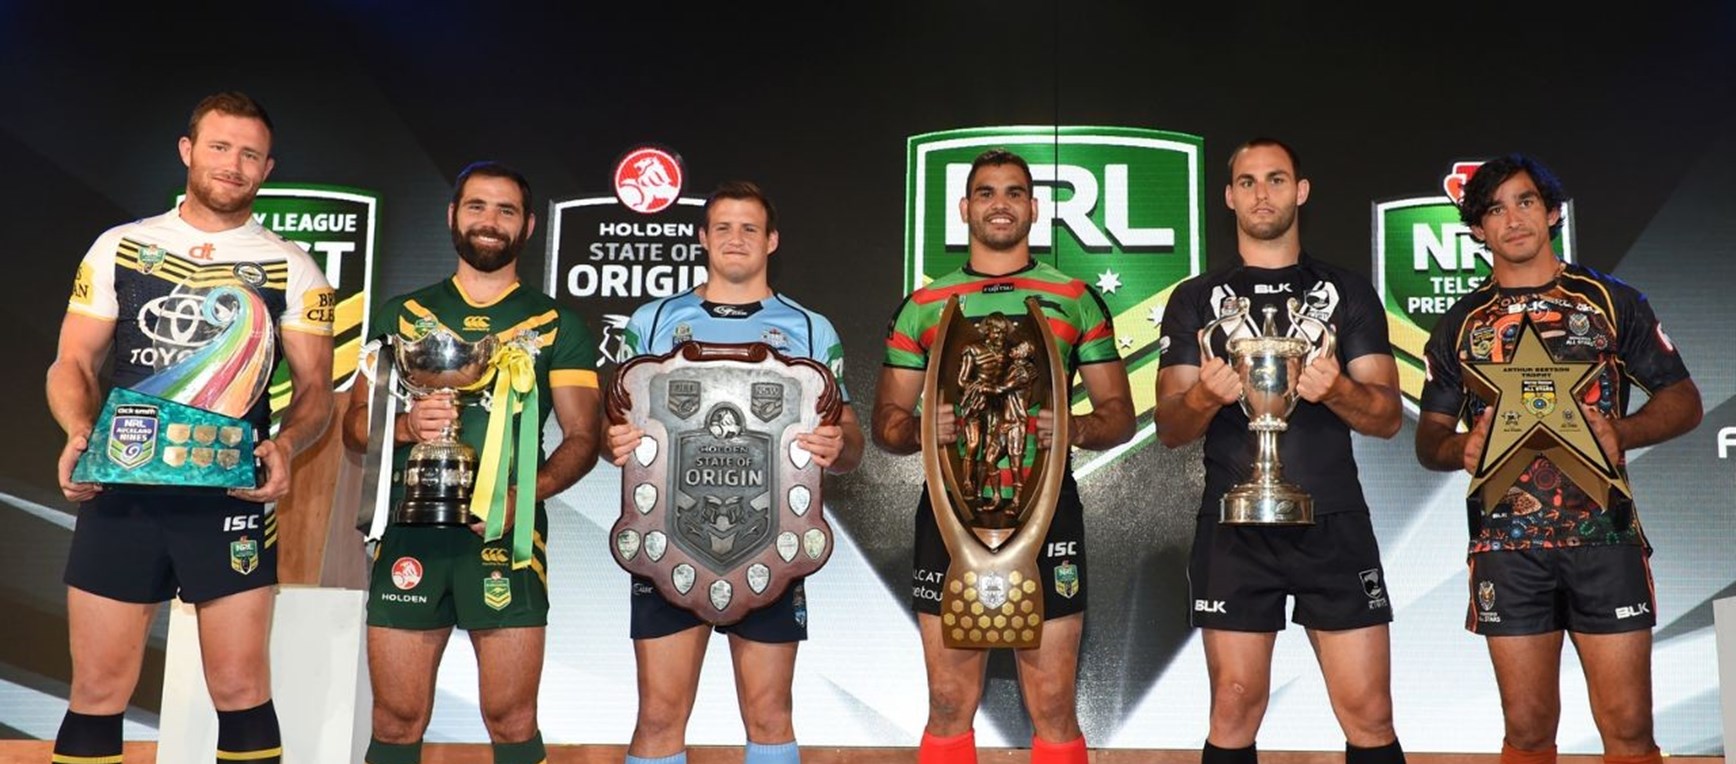 In Pictures | NRL Launch 